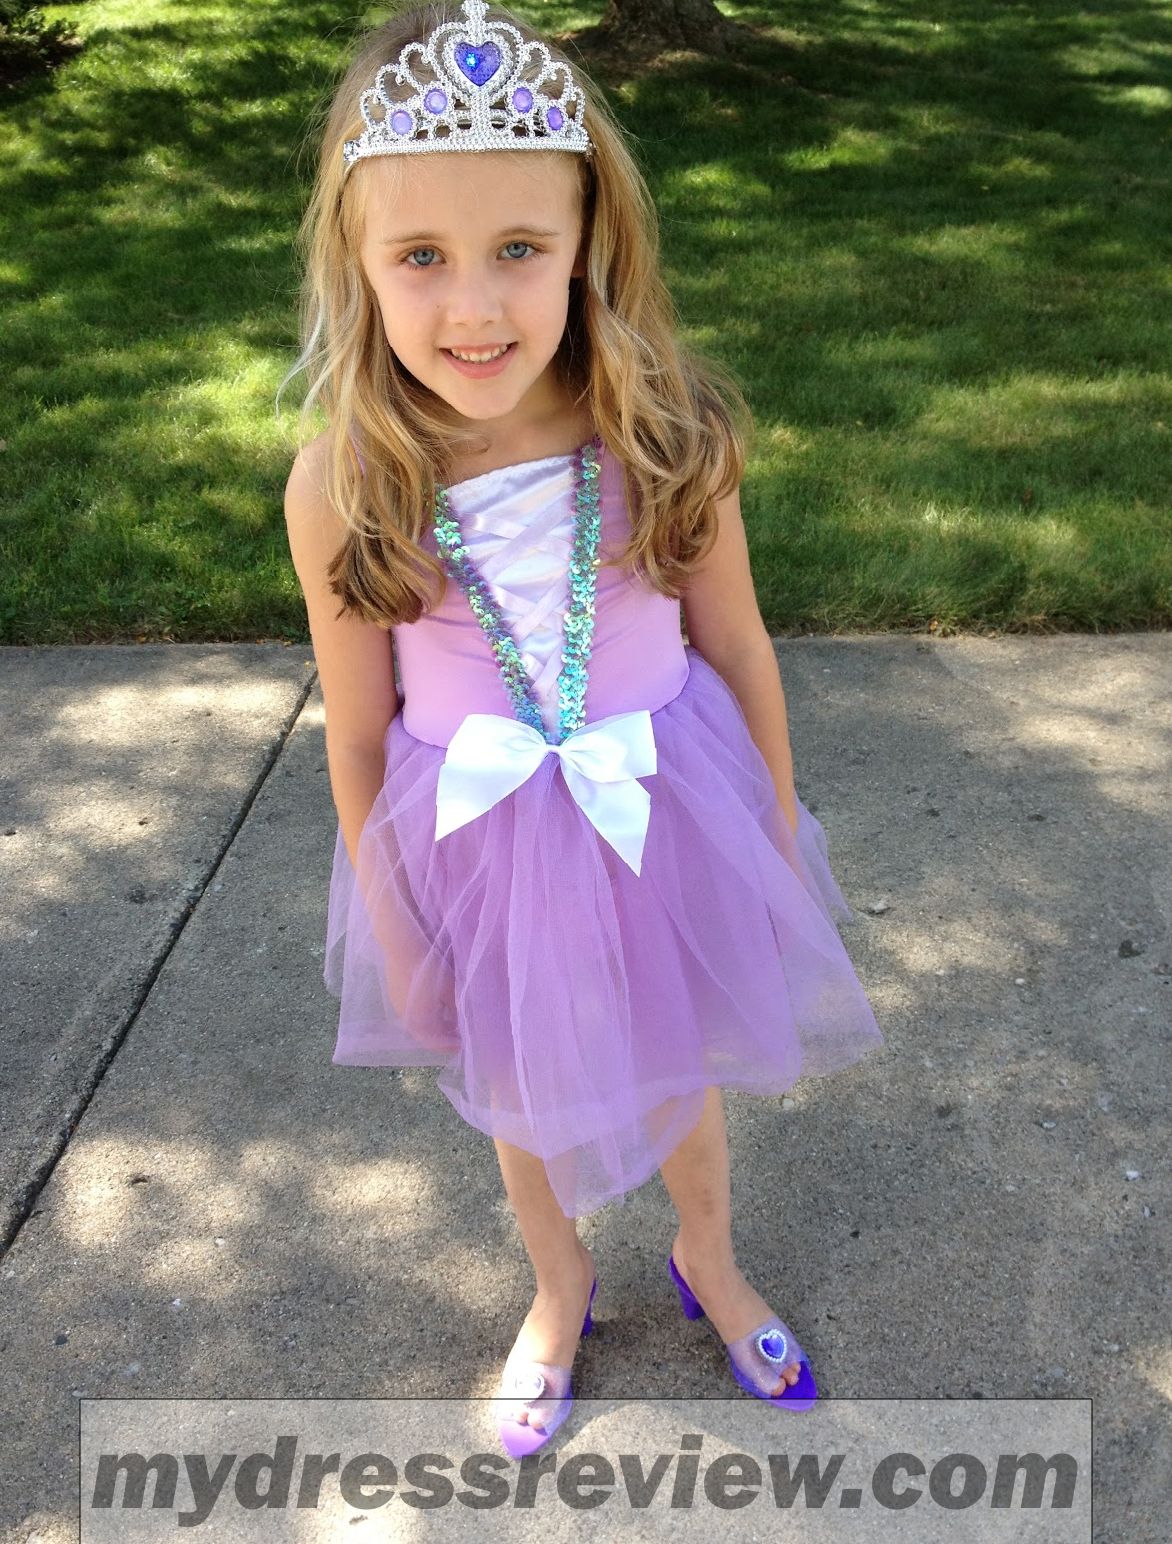 Boys Dressed As Little Girls - Things To Know Before Choosing